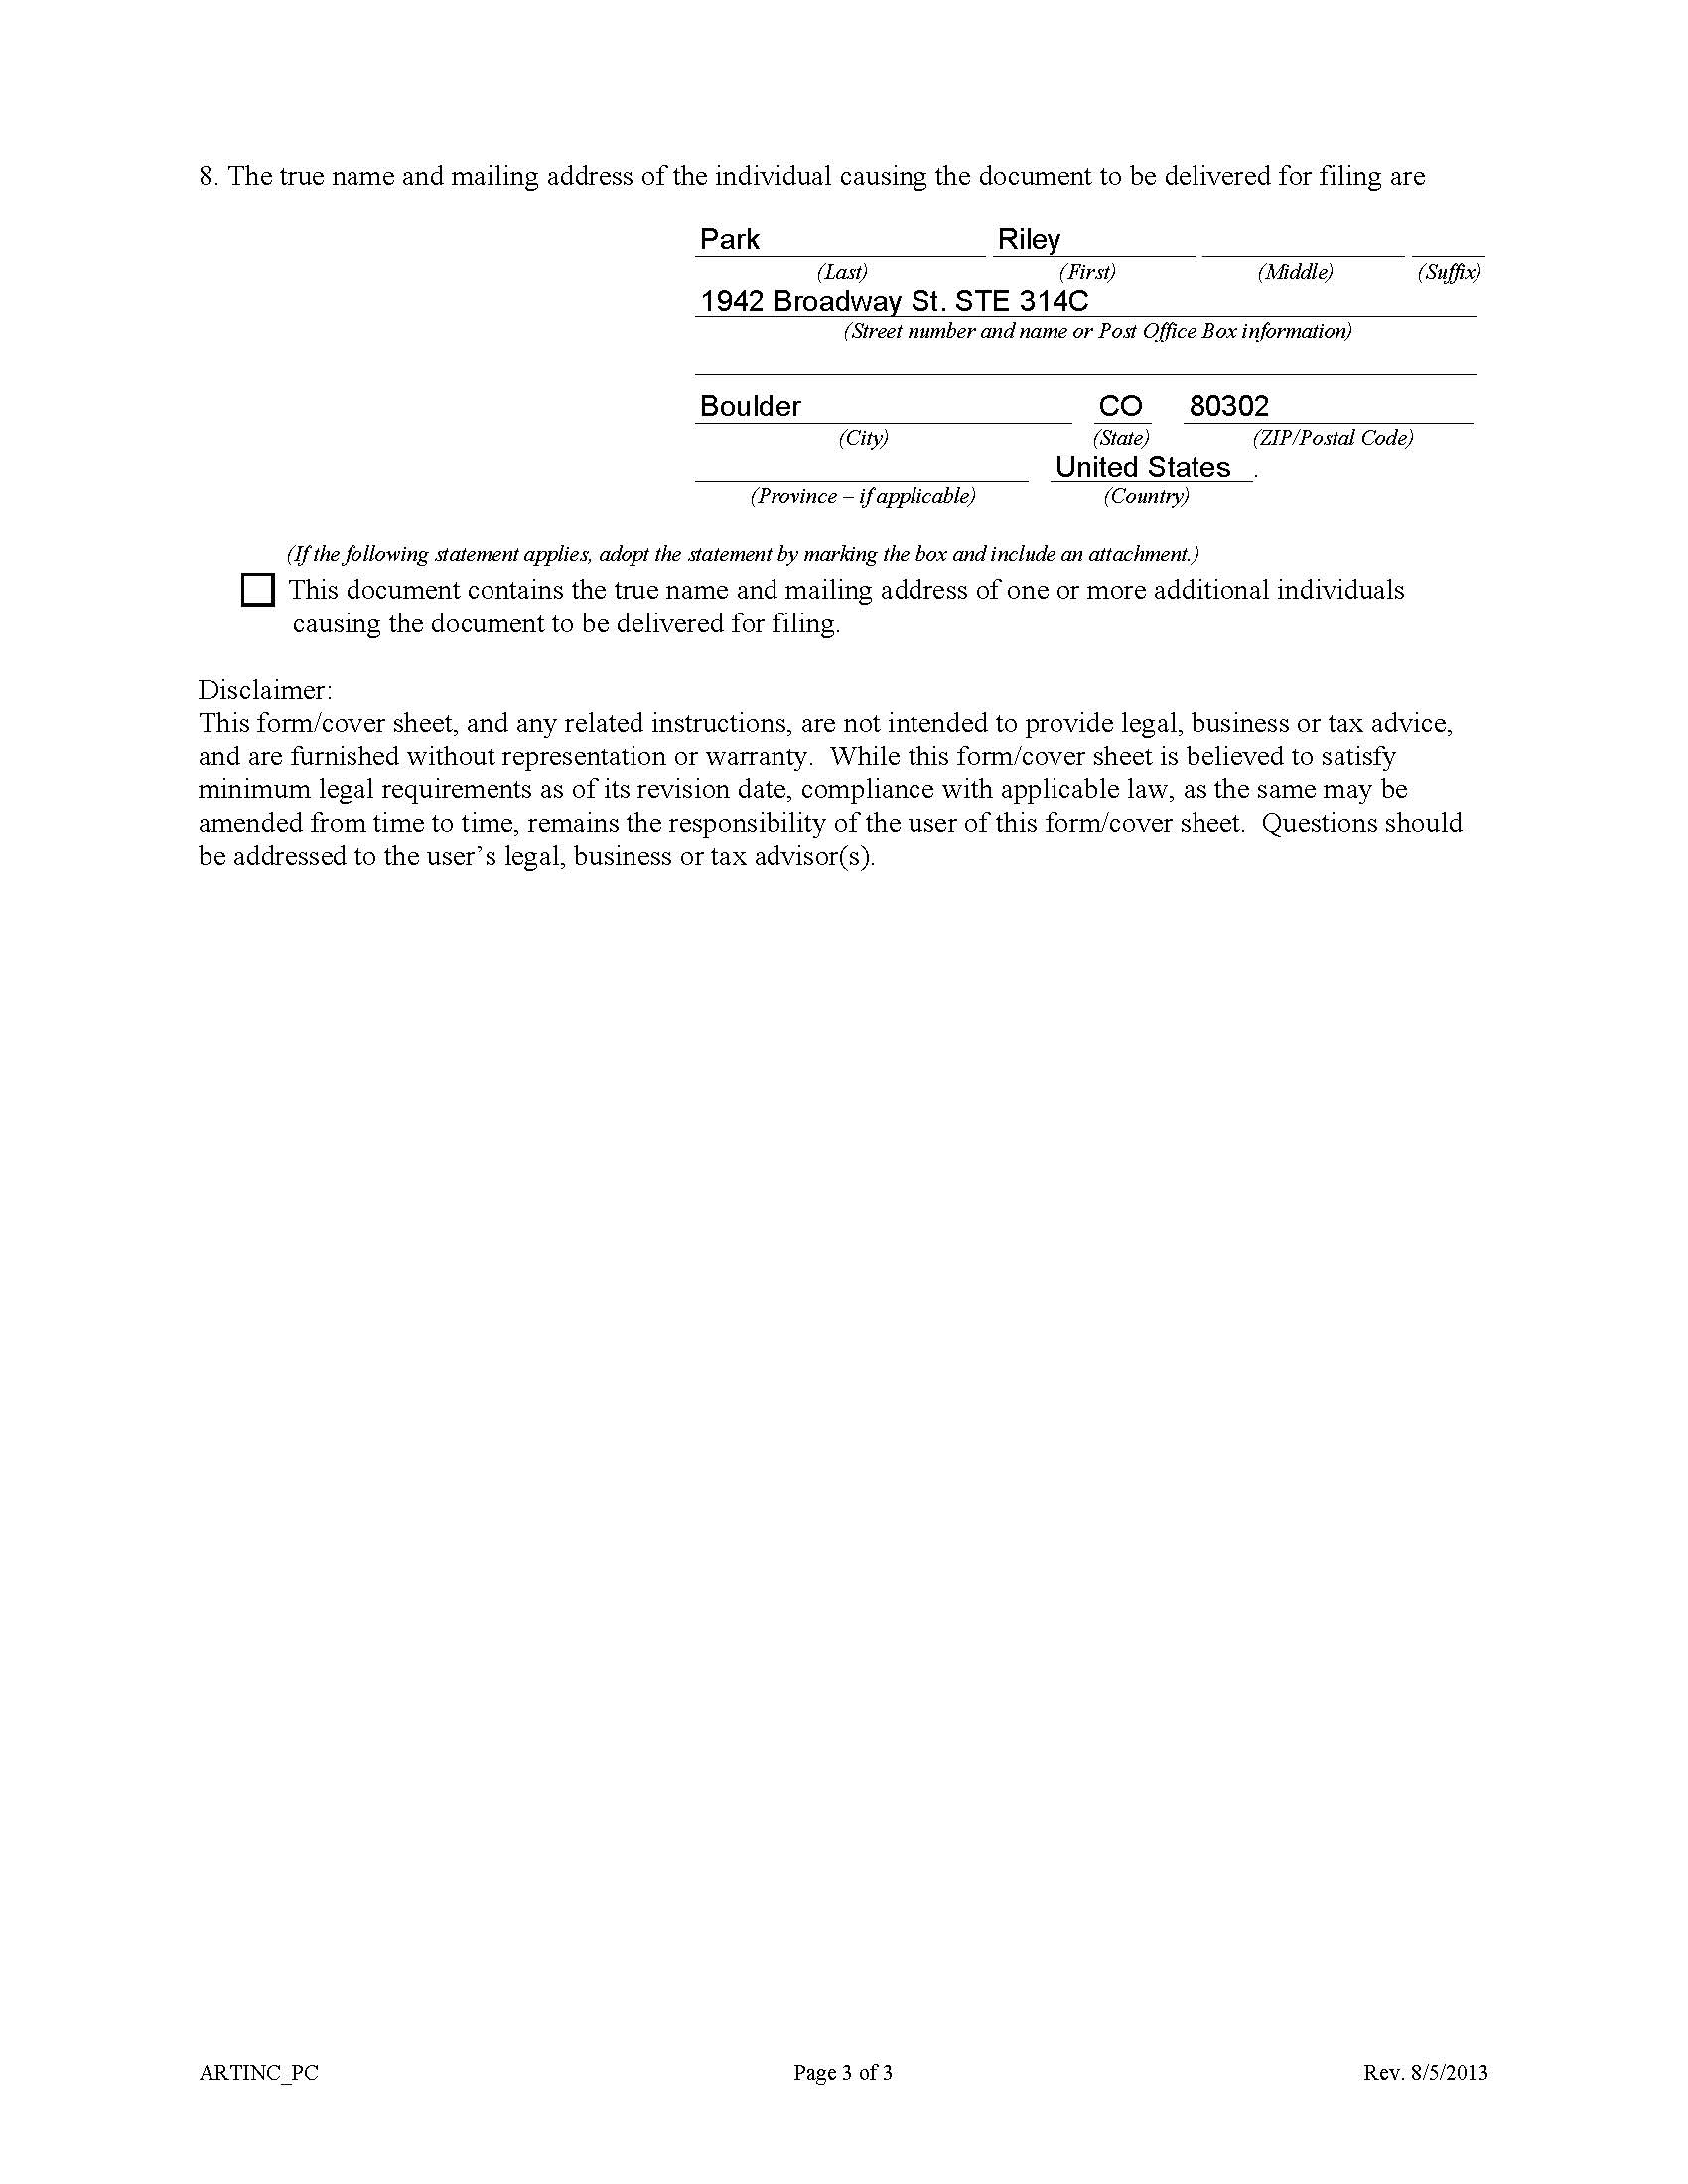 7-11-19 - CO - Initial Filing - Cocannco Inc_Page_3.jpg